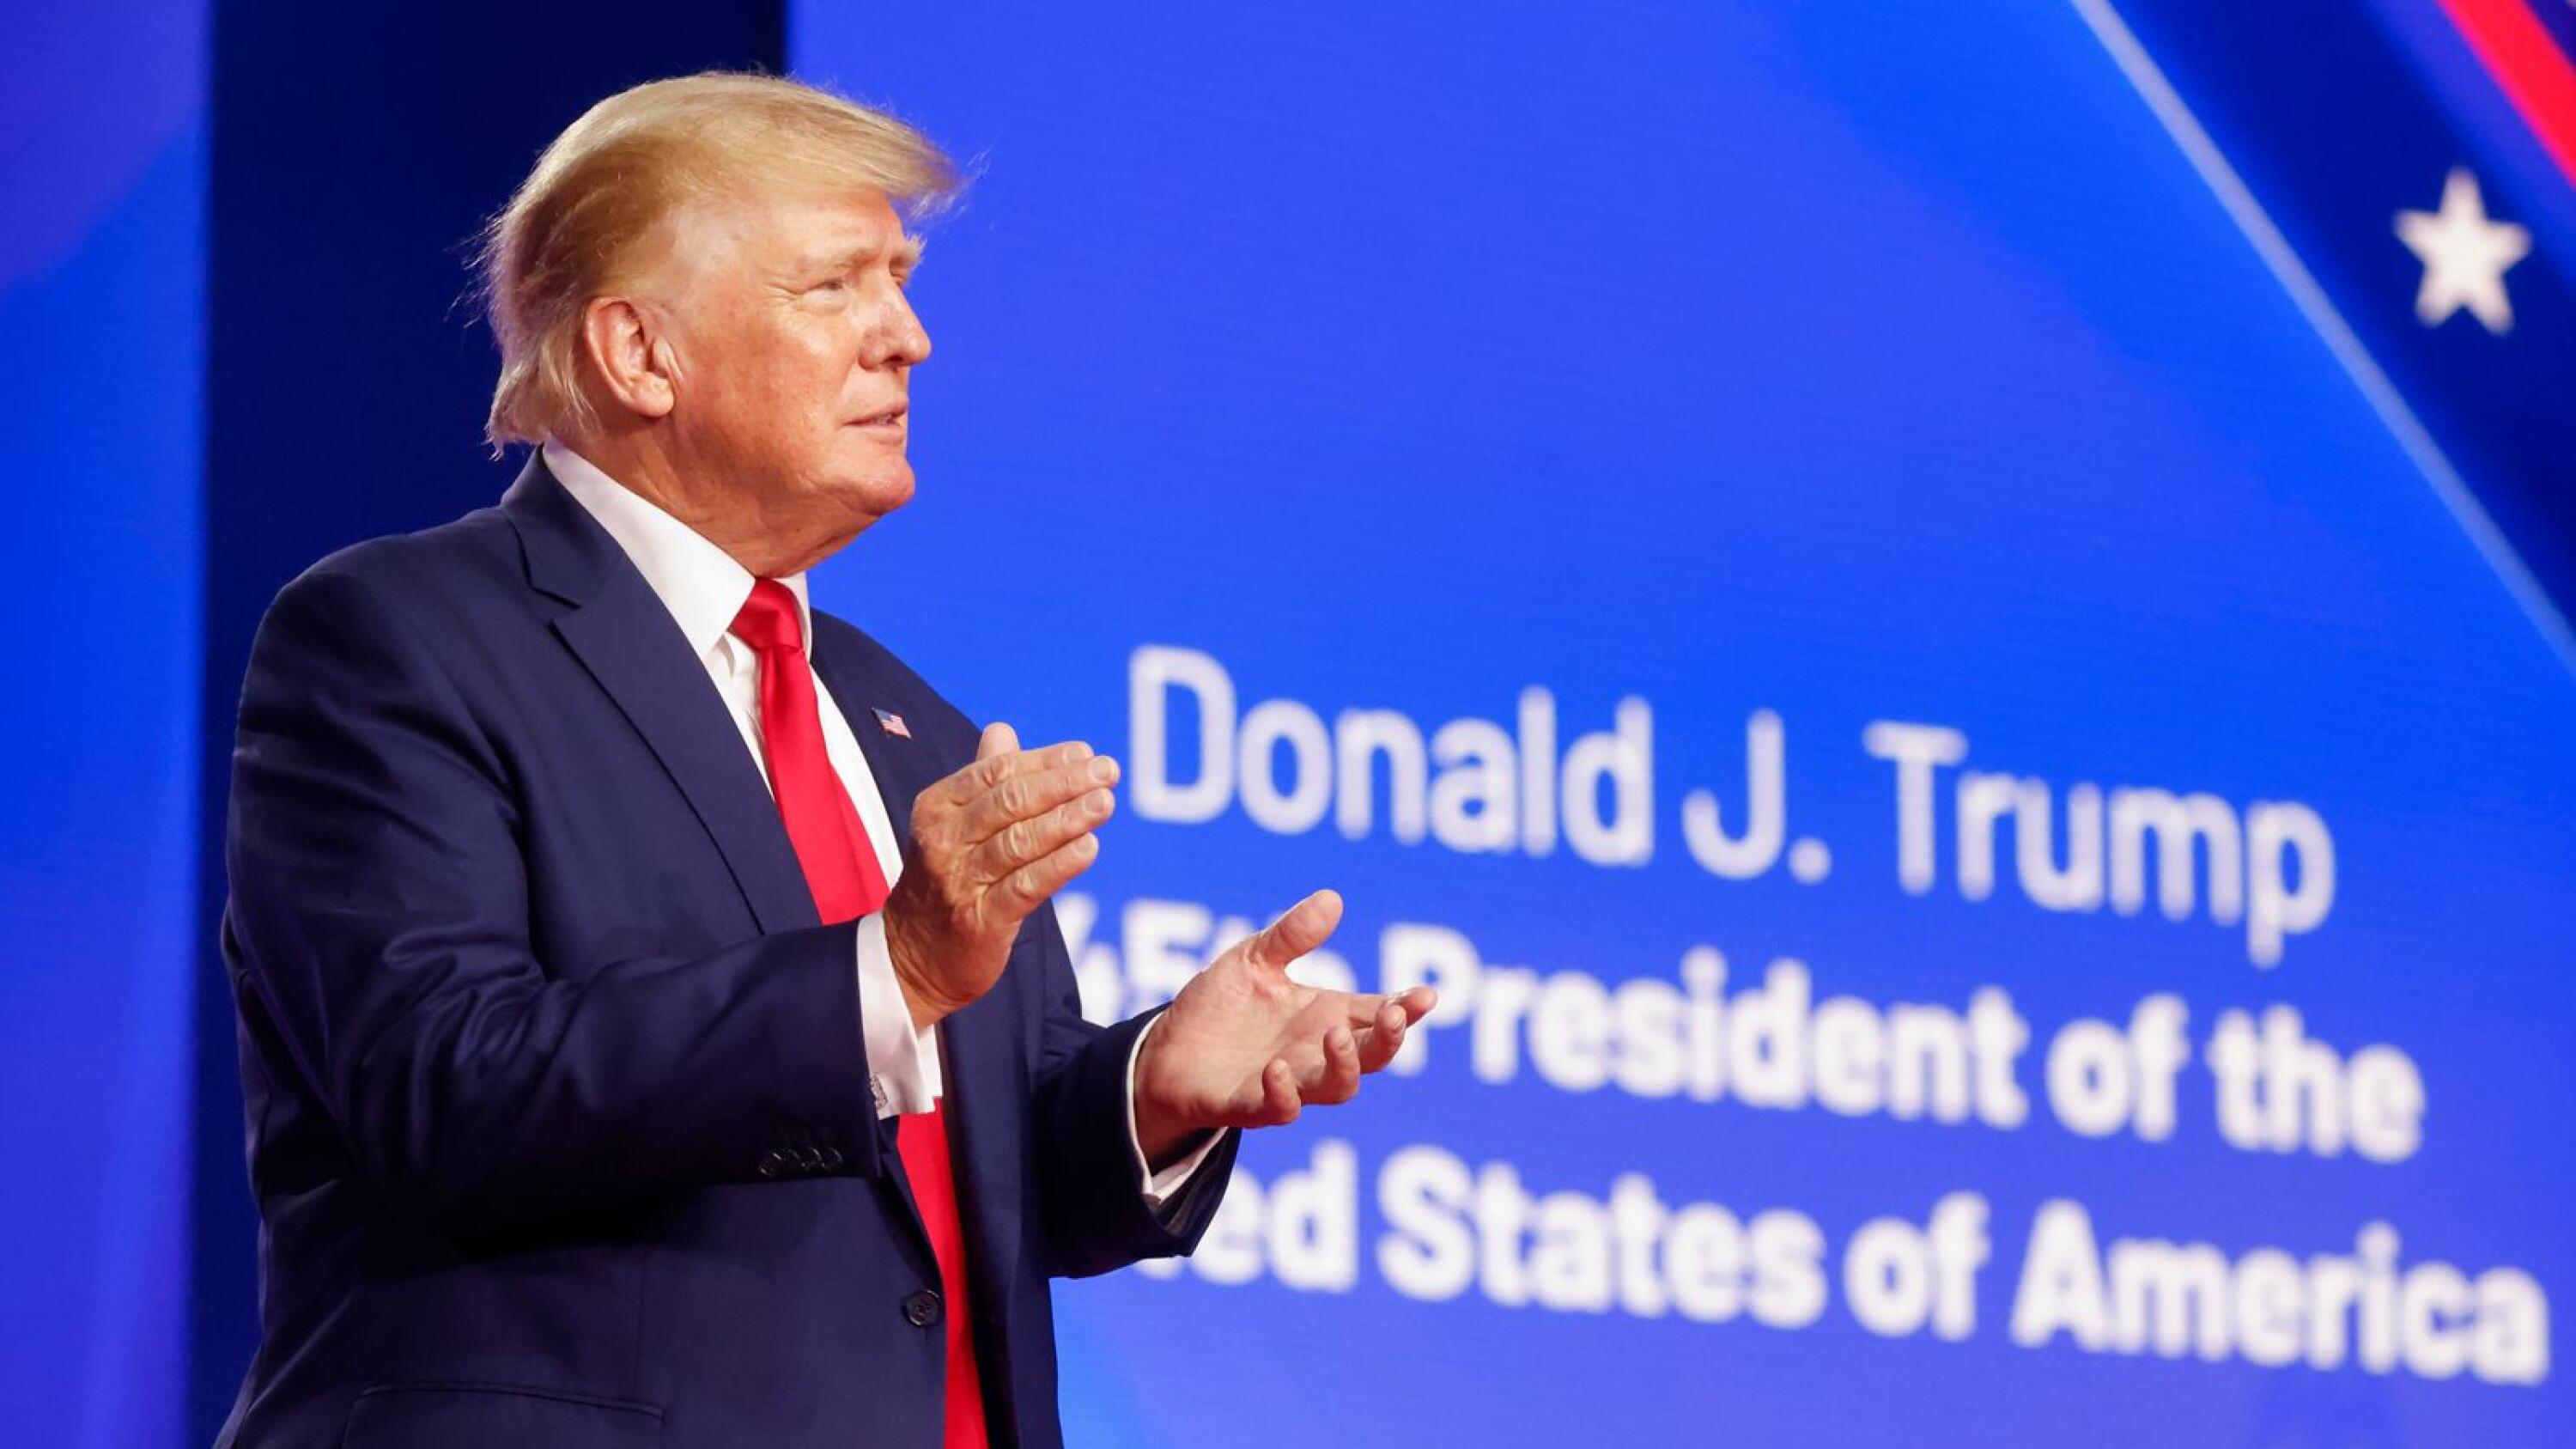 Donald Trump at CPAC Dallas complains, ‘I’m always being persecuted’